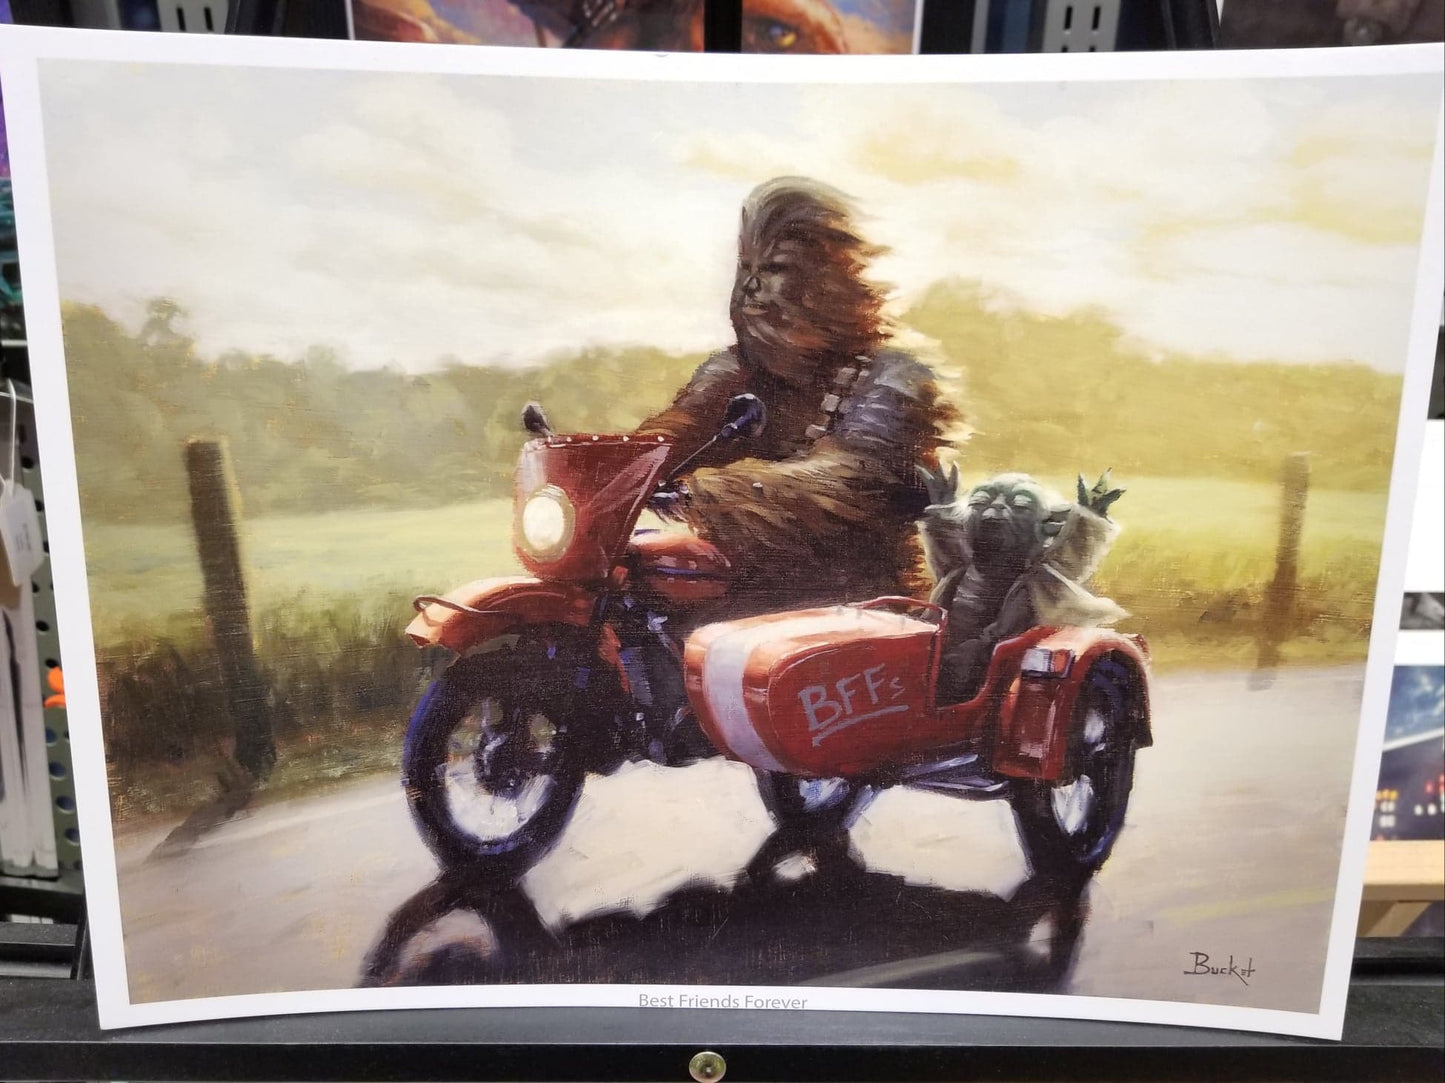 "Best Friends Forever" Art Print by Bucket   Yoda and Chewbacca have known each other for a LONG time.  Here the two dear friends have taken a well-deserved day off to ride through the countryside on a gorgeous sunny day in a vintage red motorcycle with sidecar.  Our favorite details in this art? Look at the joy on Yoda's face, and the pride in Chewbacca's expression. Chewie is no copilot here—the bike is all his!